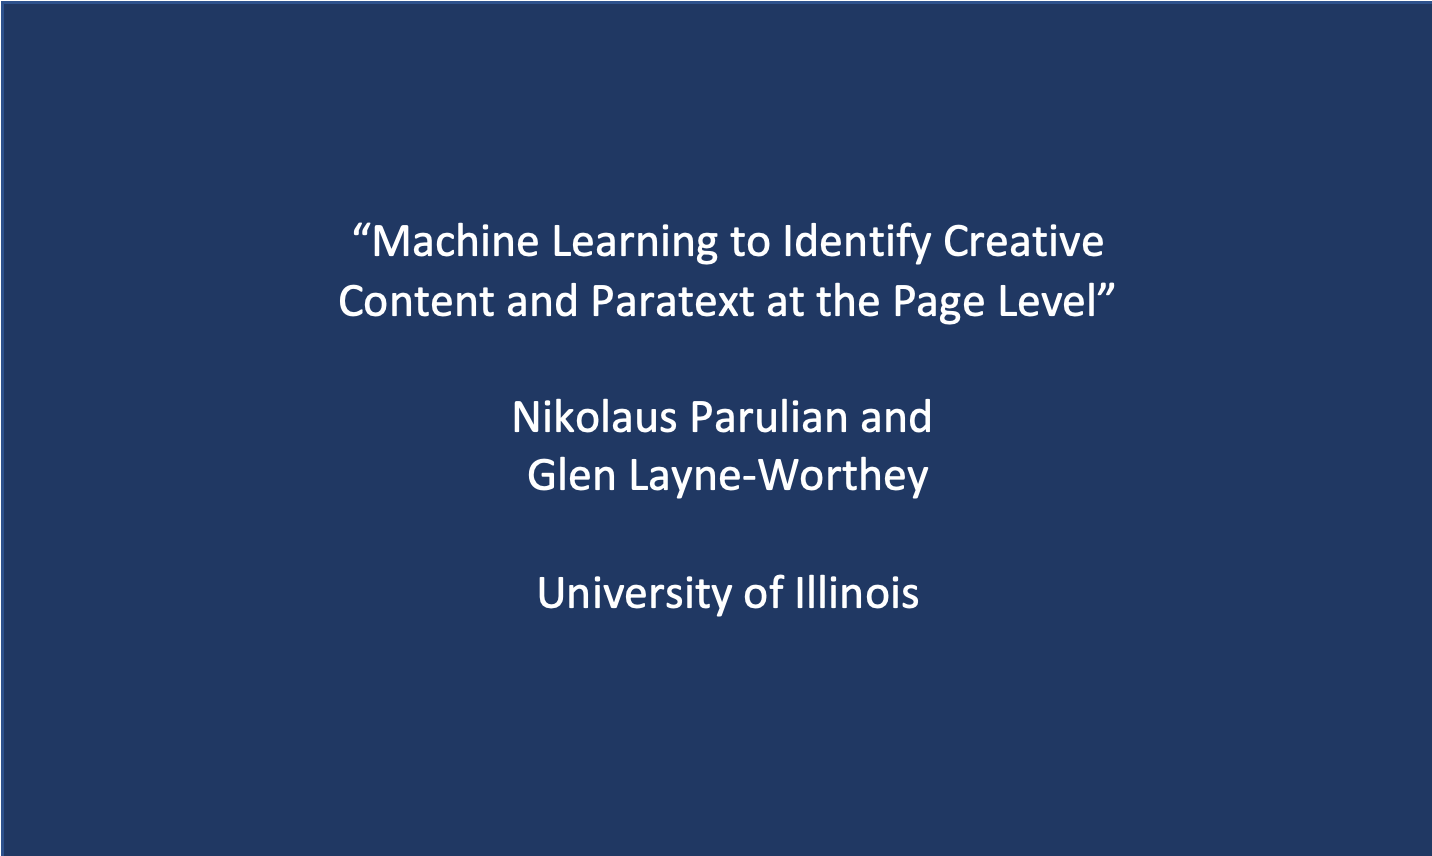 Workshop 5: Nikolaus Parulian and Glen Layne-Worthey, ‘Machine Learning to Identify Creative Content and Paratext at the Page Level’